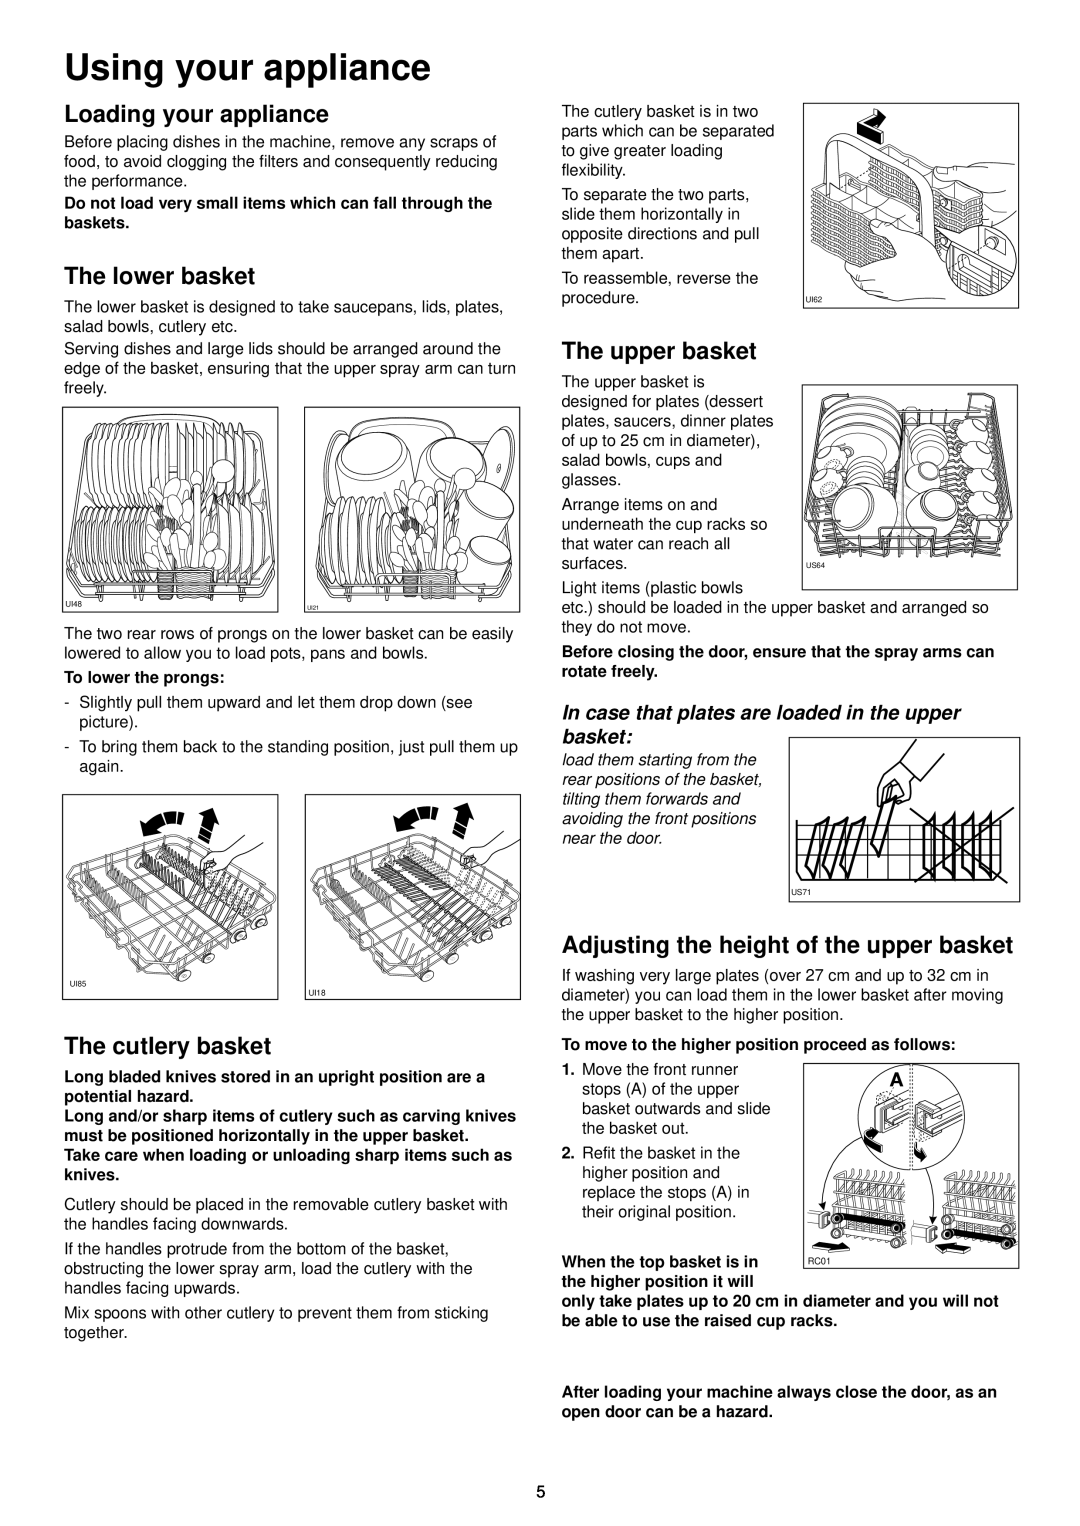 Zanussi DWS 909 manual Using your appliance, Loading your appliance, The lower basket, The upper basket, The cutlery basket 